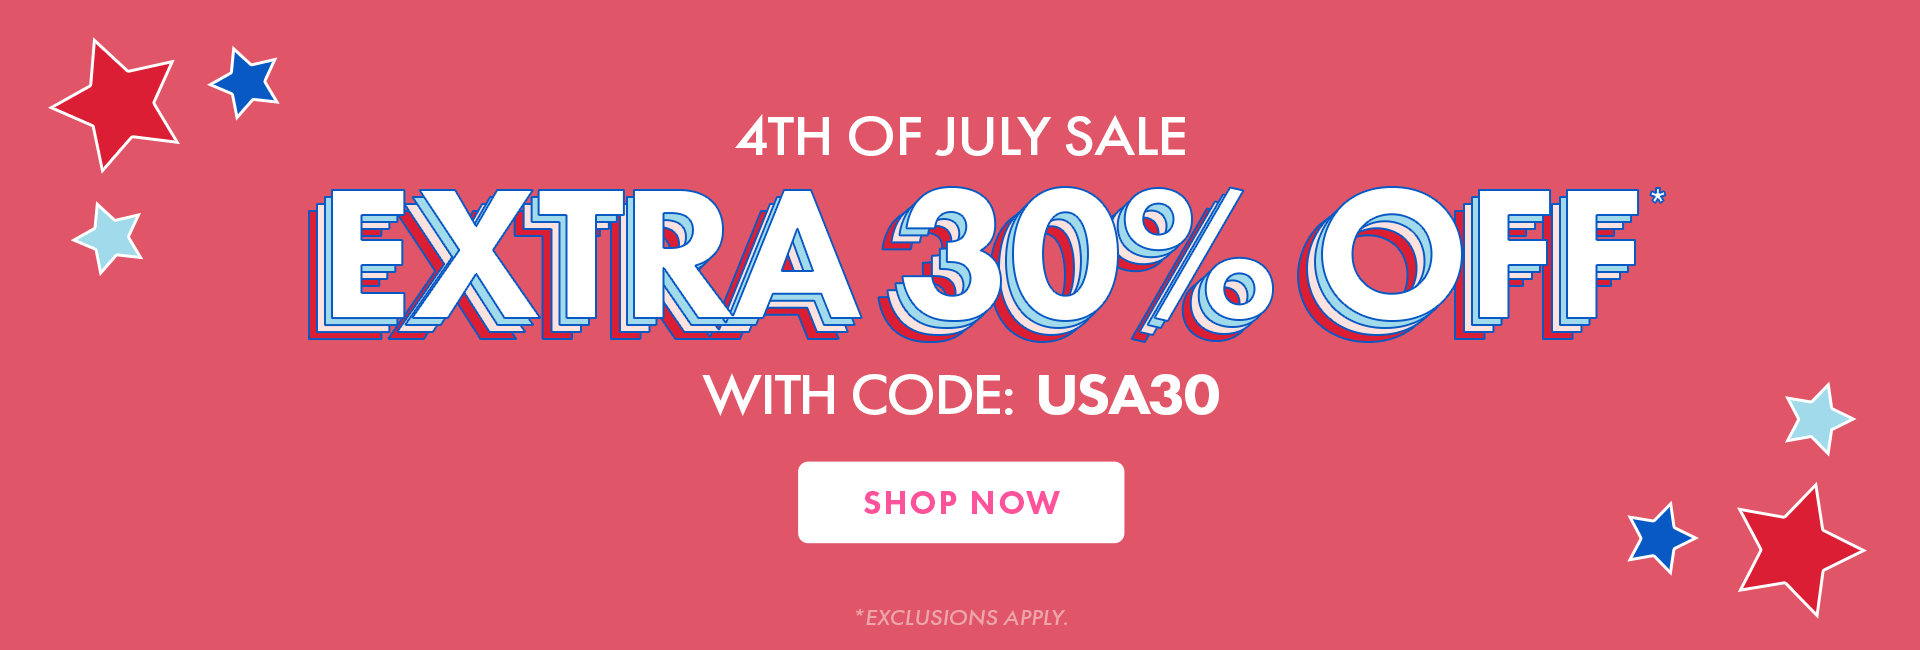 Save an Extra 30% Off Sitewide* with code: USA30